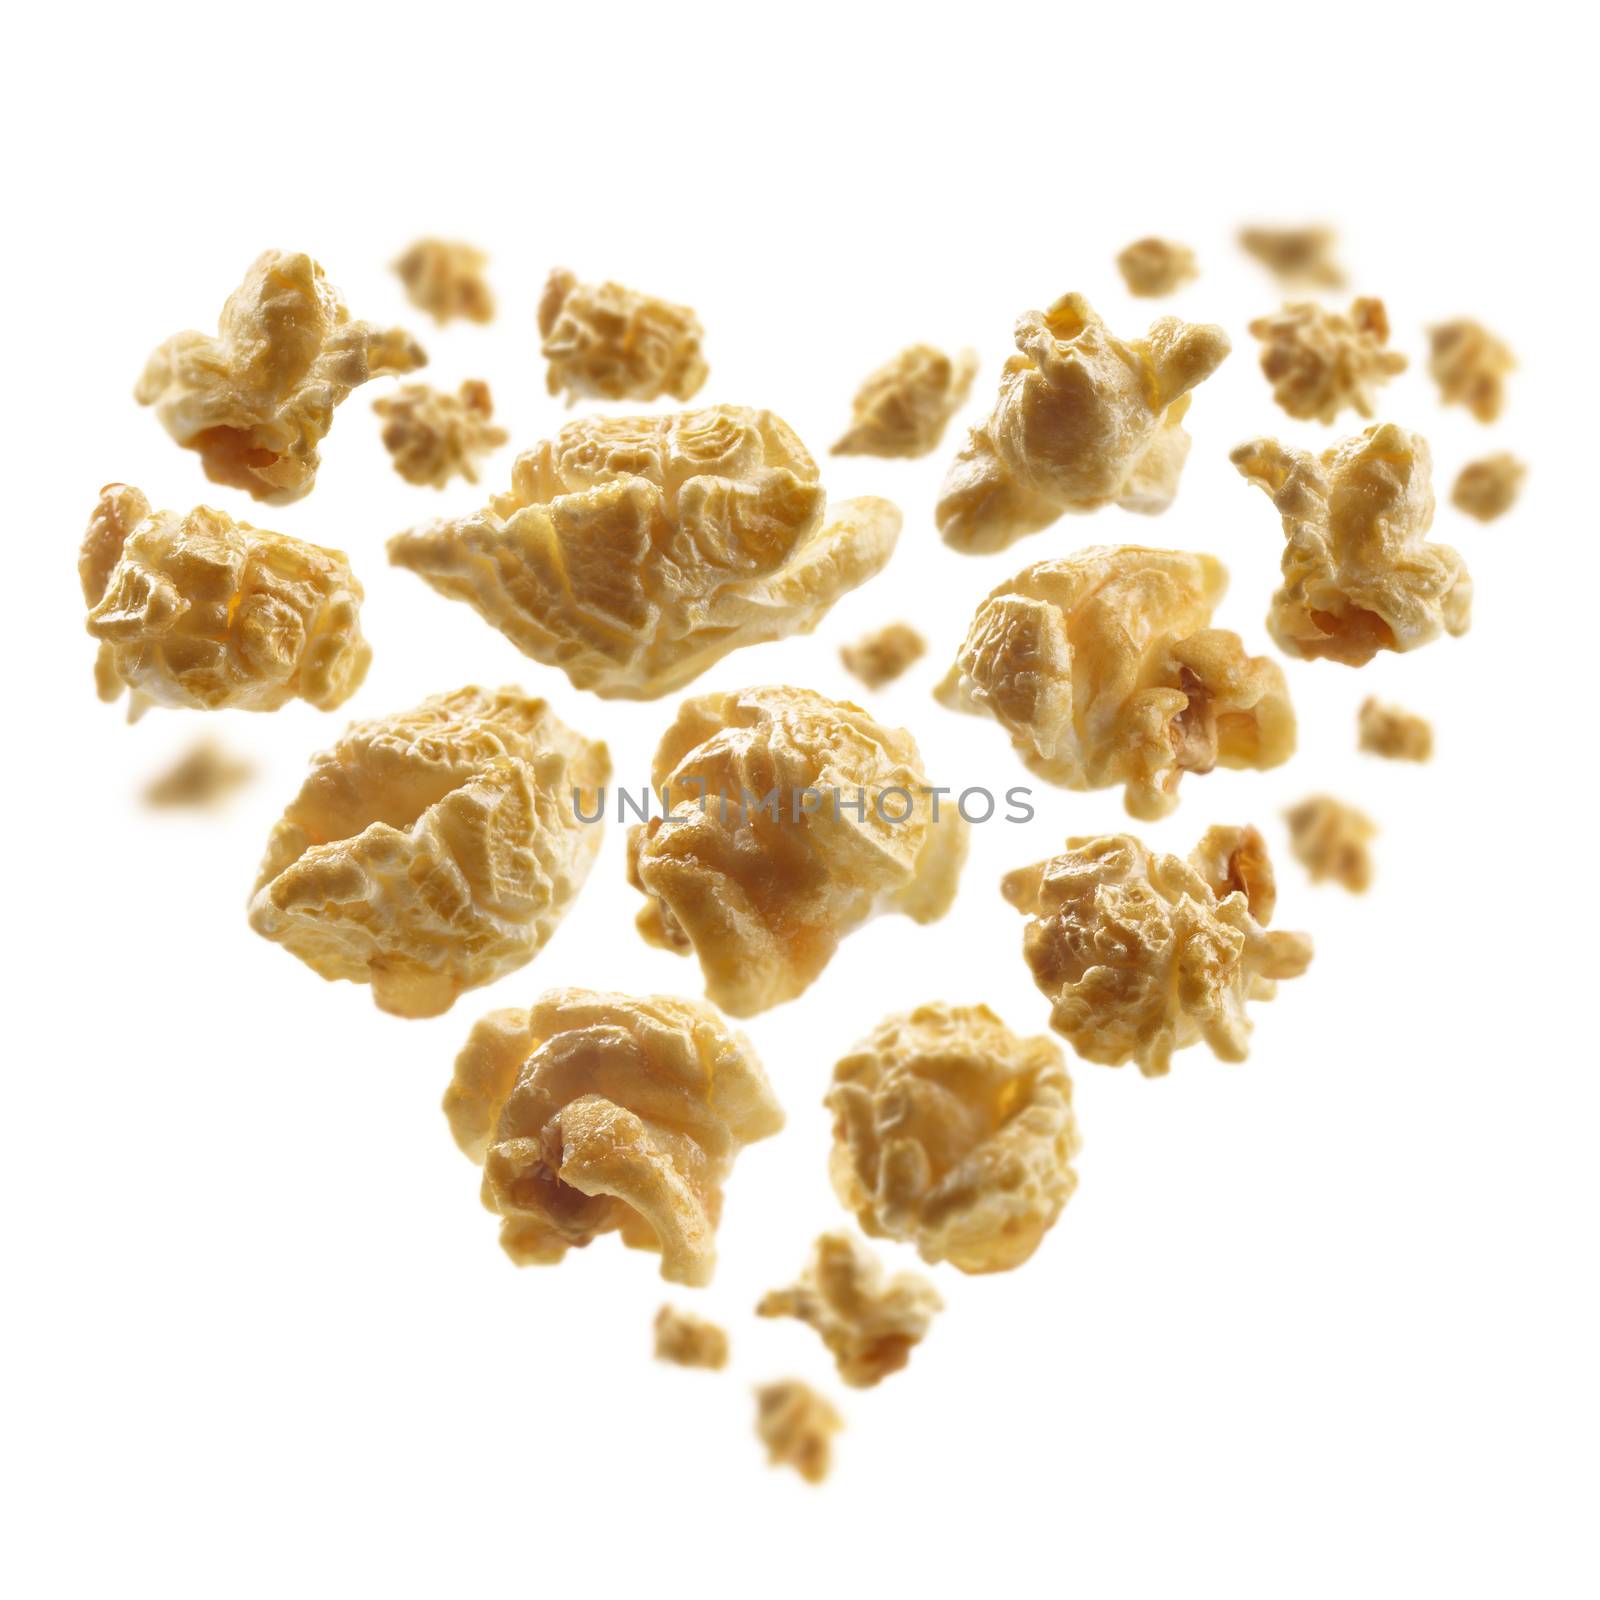 Popcorn with a taste of caramel in the shape of a heart.